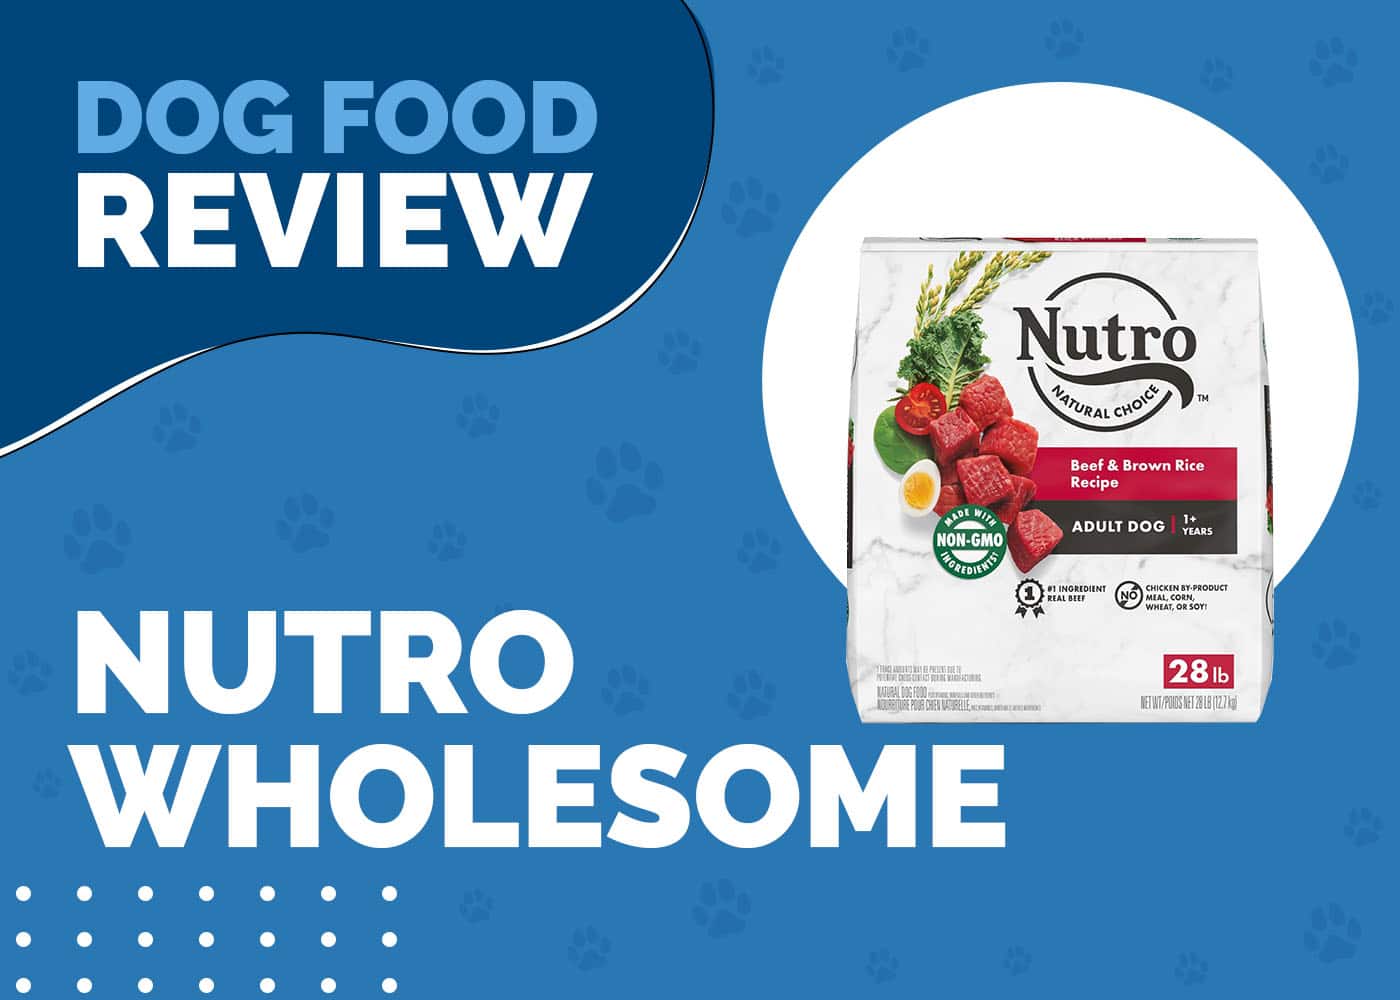 Nutro Wholesome Essentials Dog Food Review